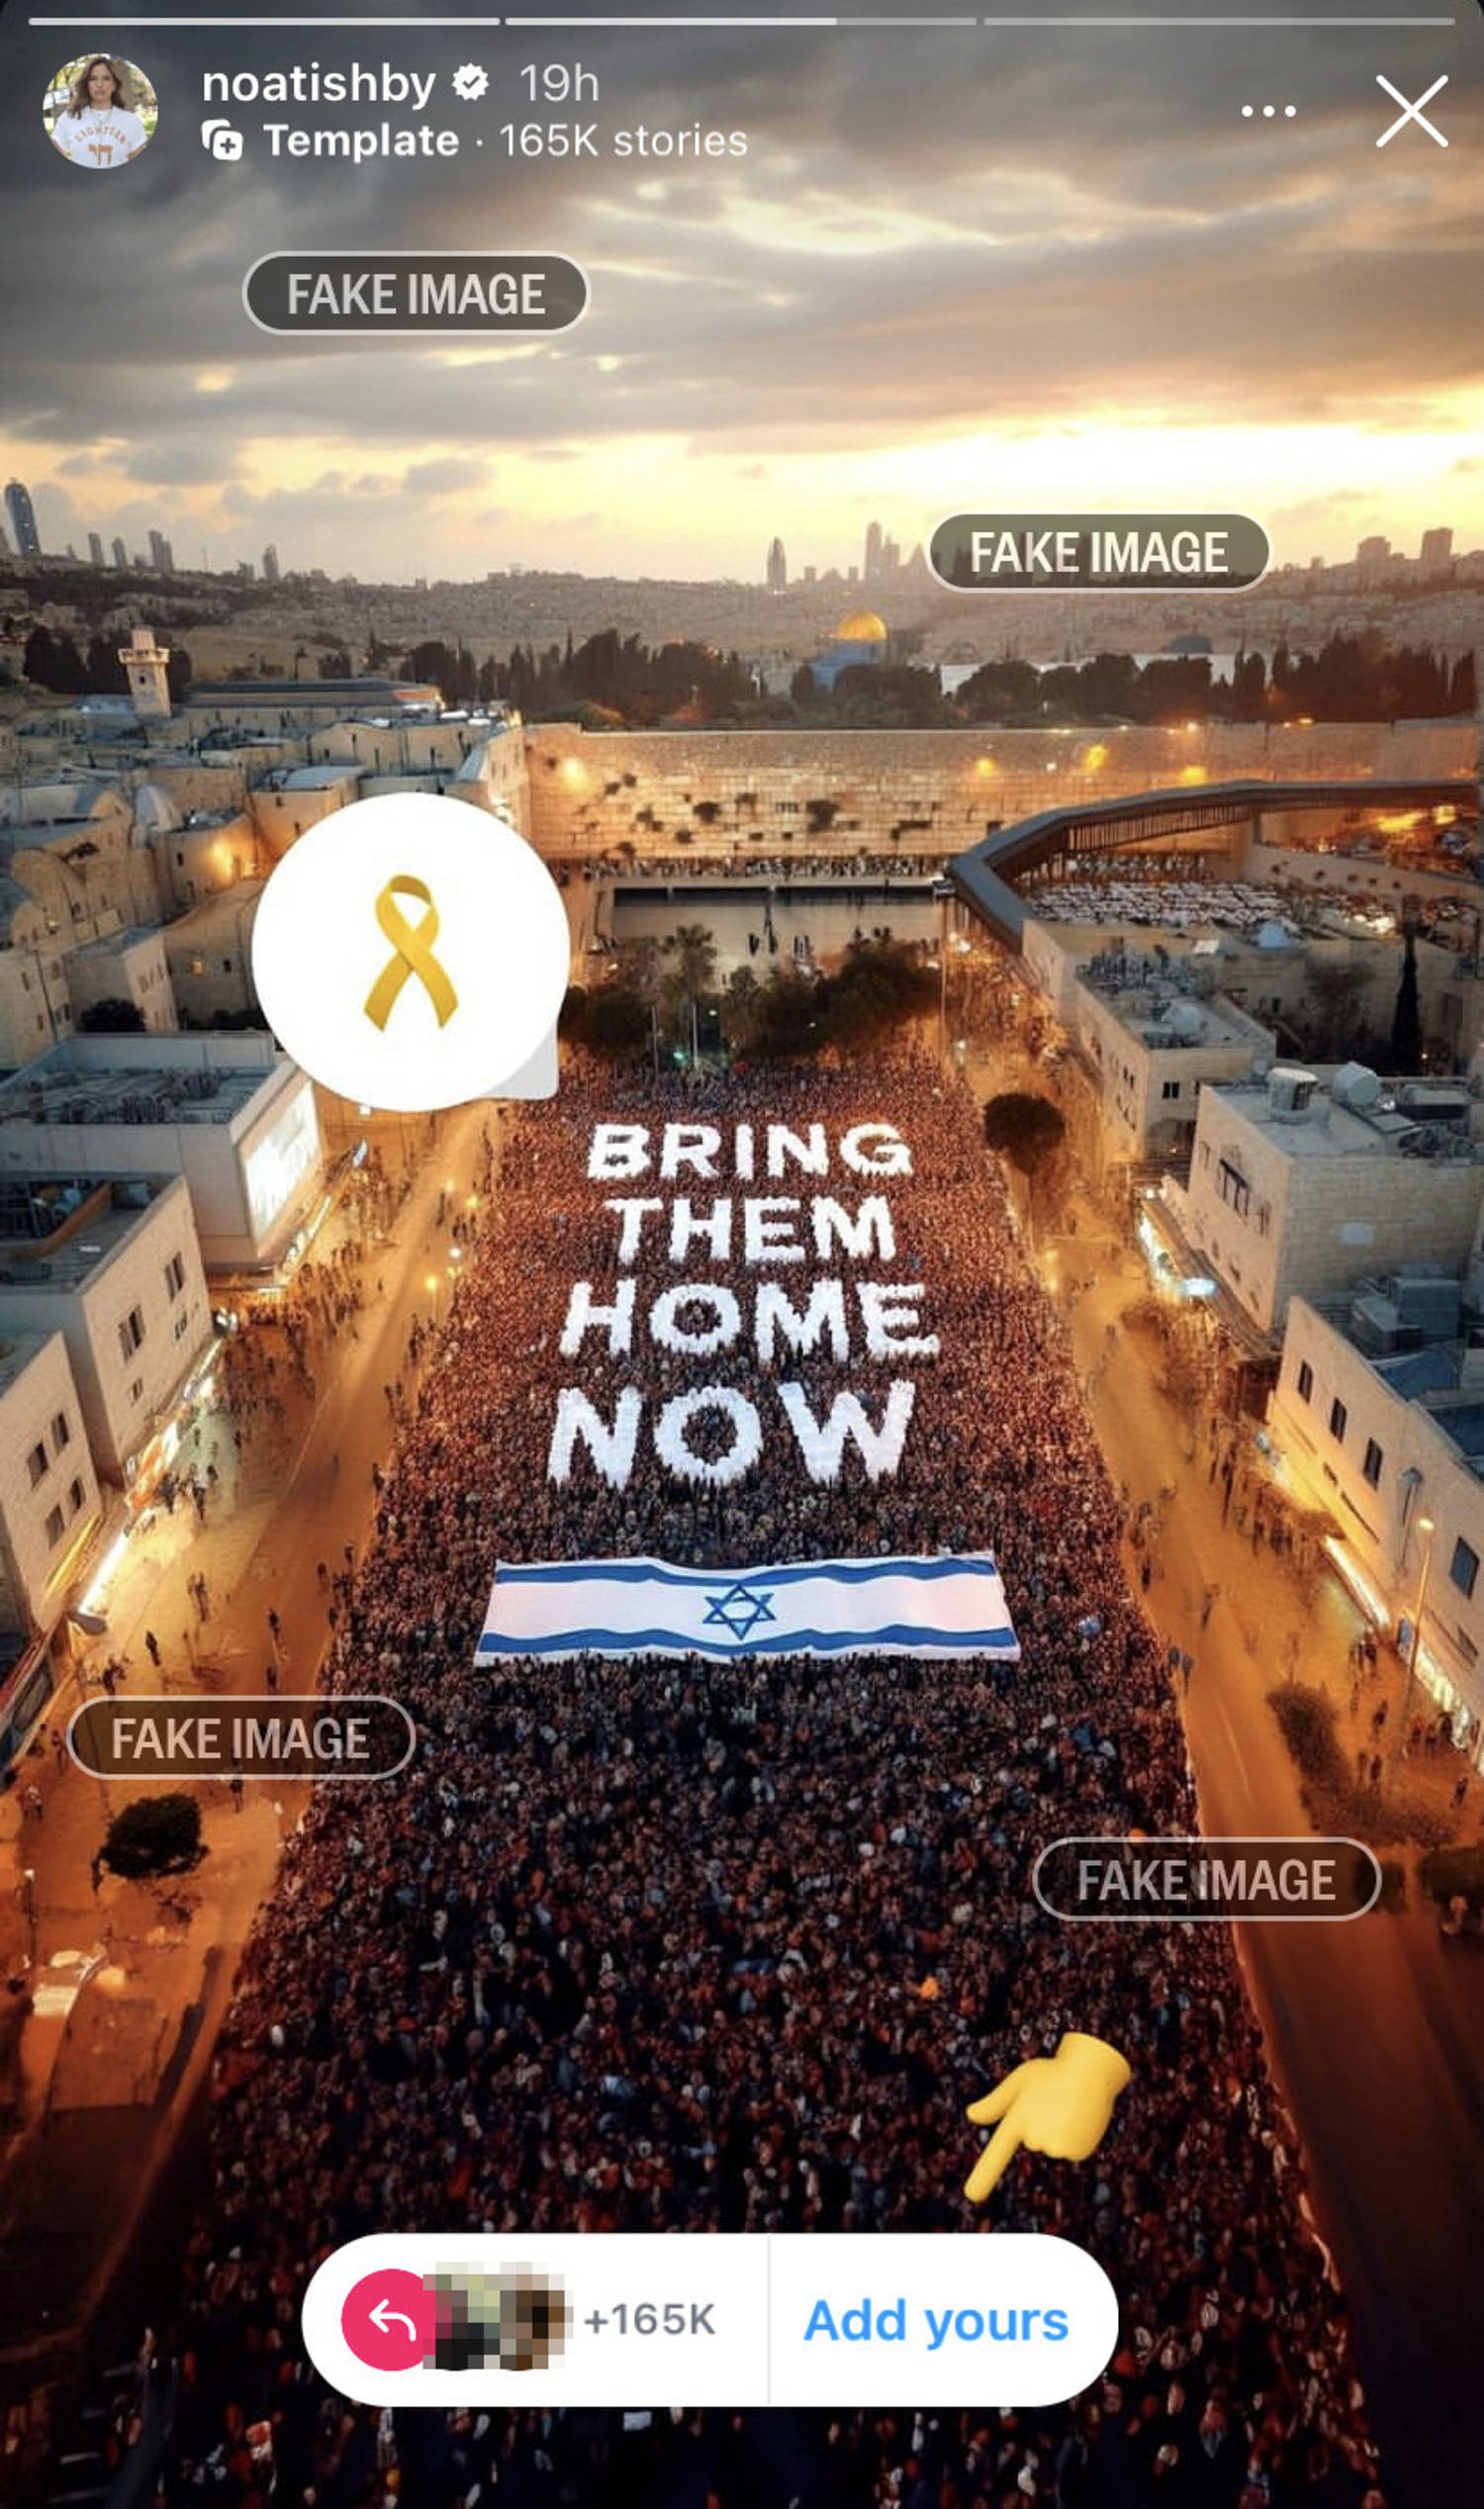 Viral ‘All Eyes on Rafah’ image inspires wave of AI-generated Instagram posts about Israel-Hamas war